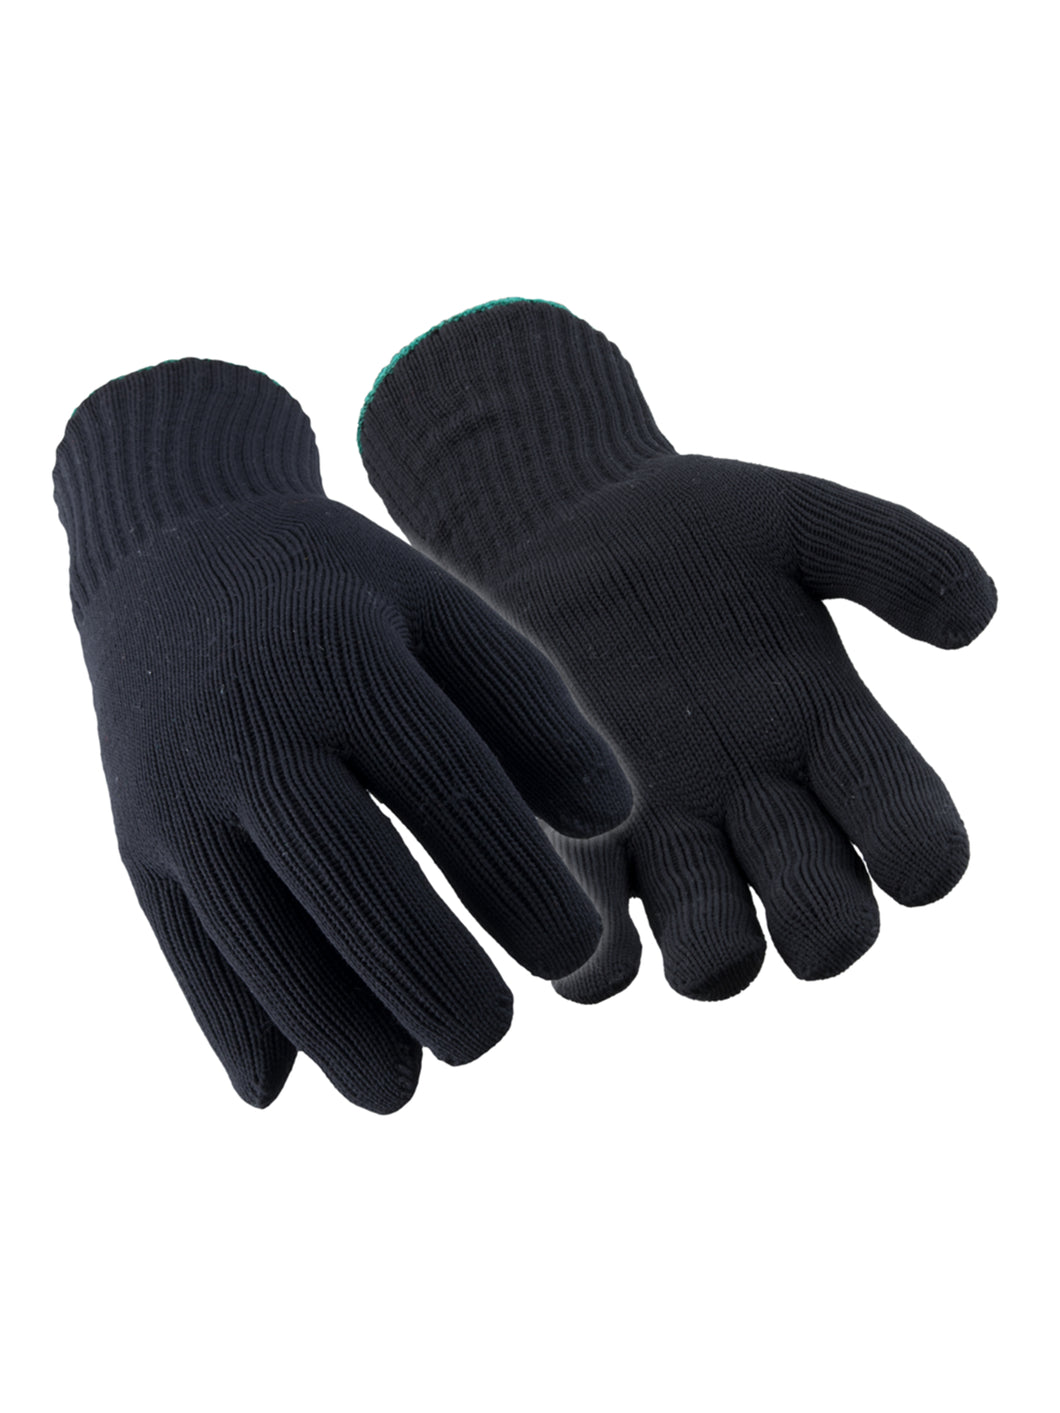 Dual-Layer Knit Gloves